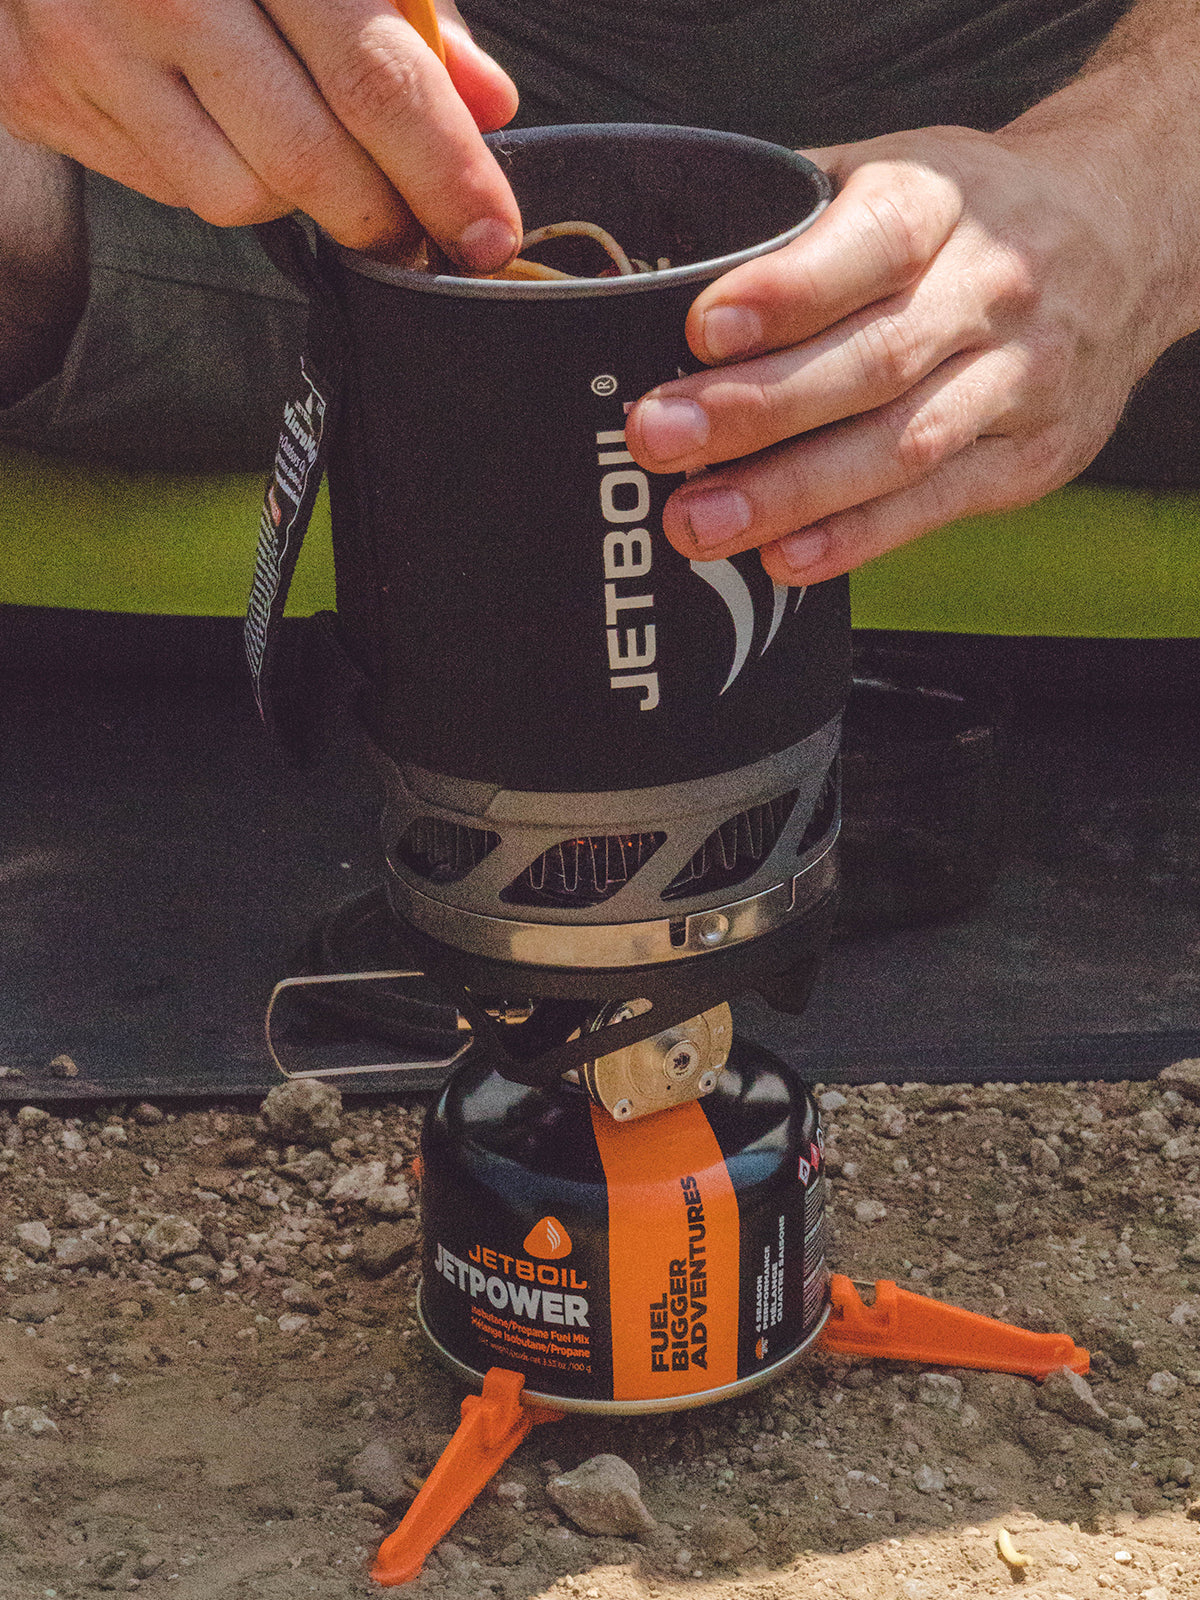 Jetboil MICROMO Cooking System being used to cook